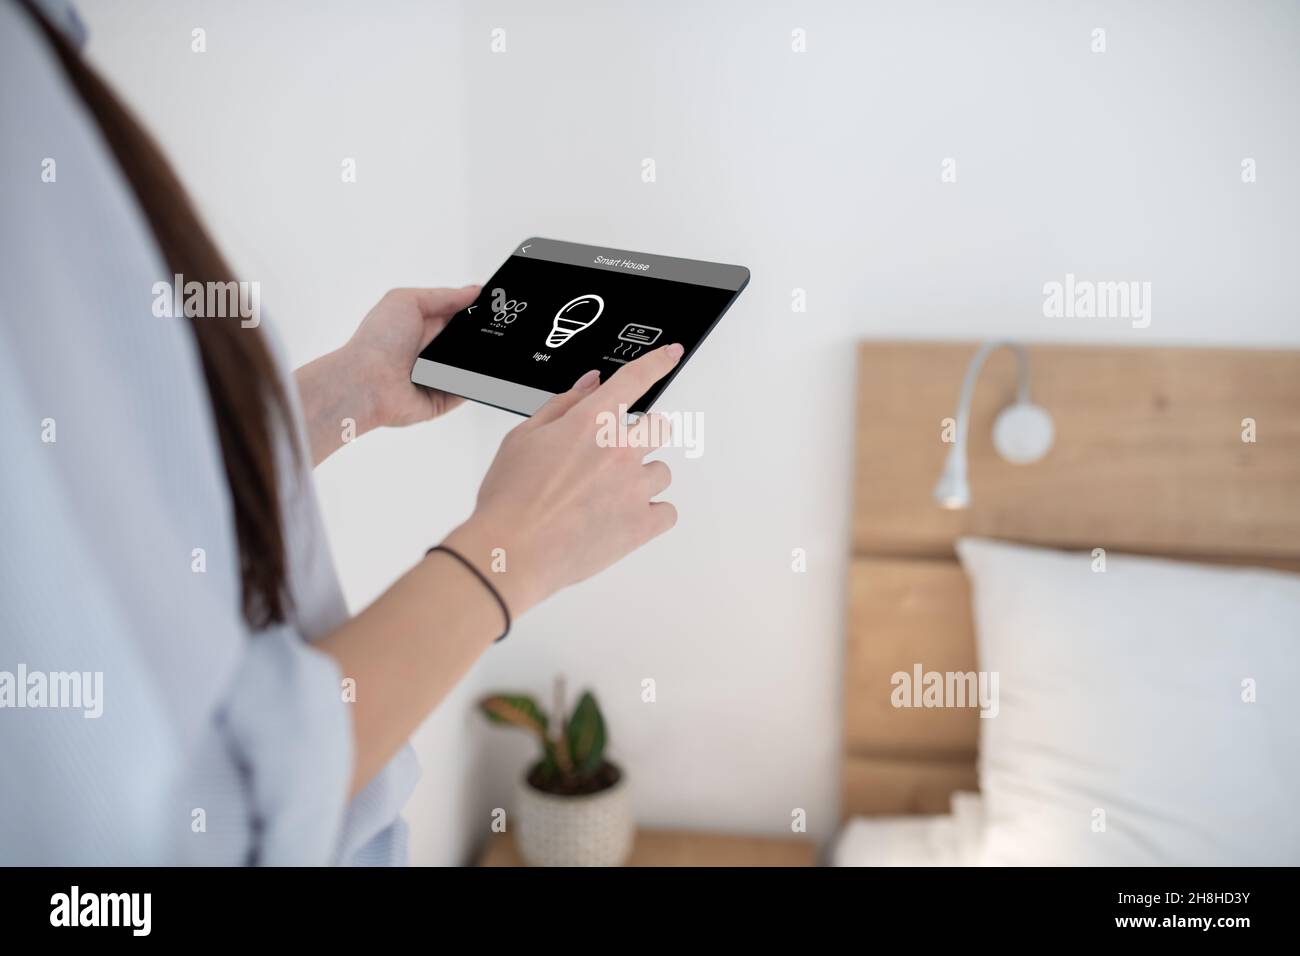 Woman turning on light using a tablet Stock Photo